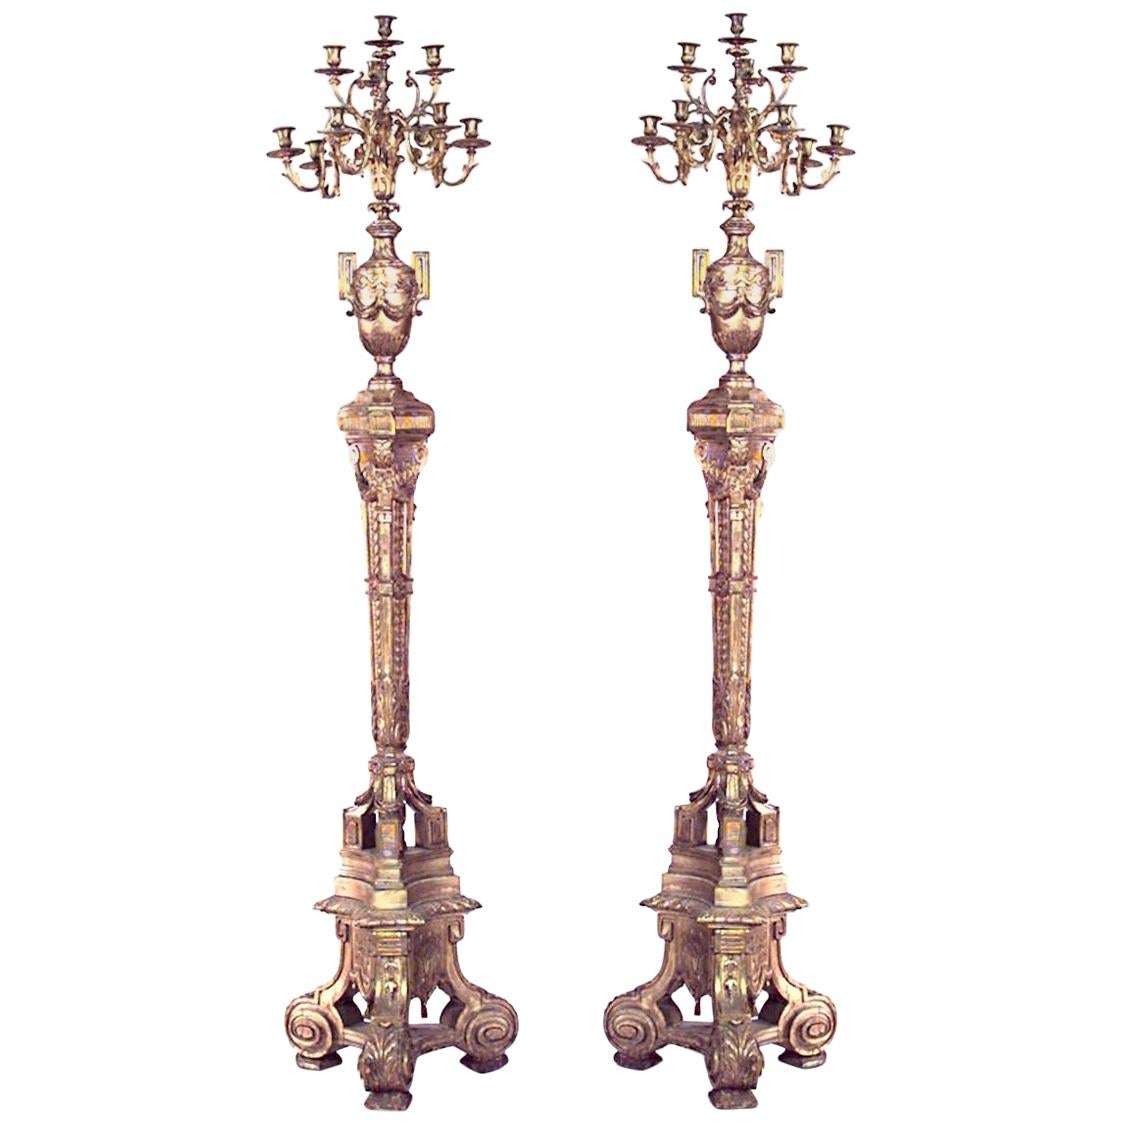 Pair of French Louis XVI Style Gilt Wood Floor Torchieres